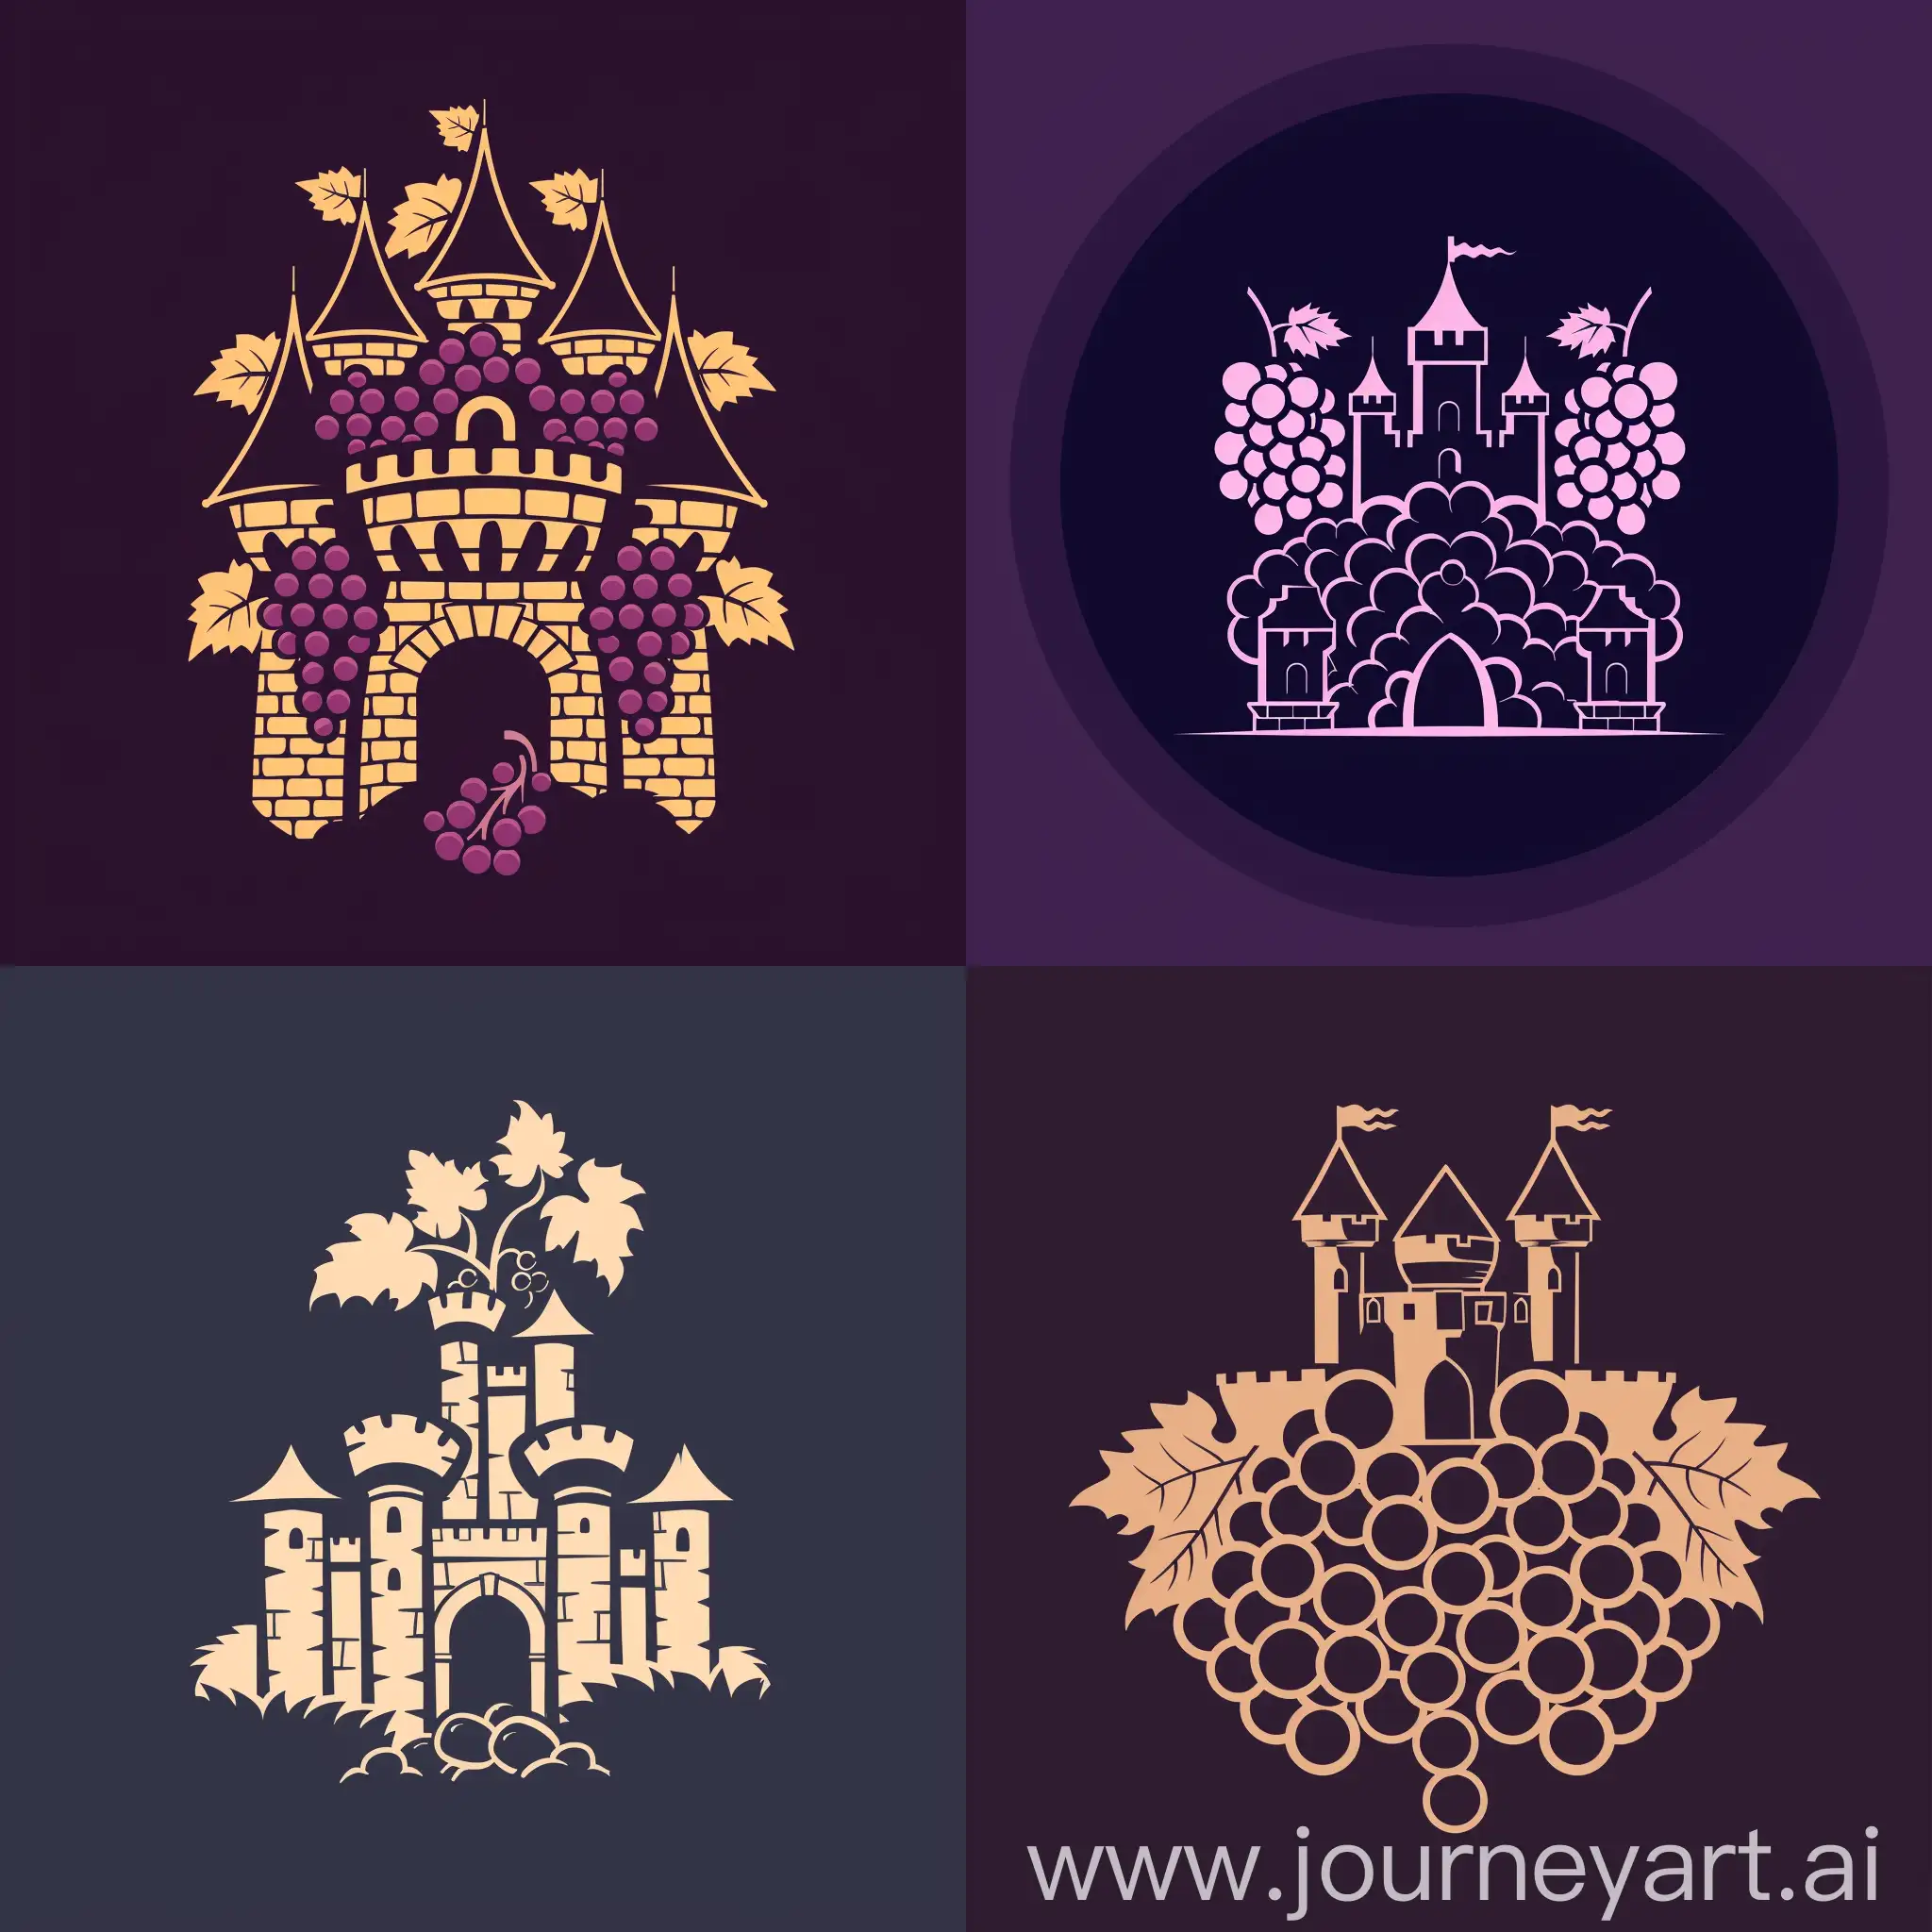 Vineyard-Castle-Inspired-by-Lafite-and-Penfolds-Wine-with-Grape-Vine-Logo